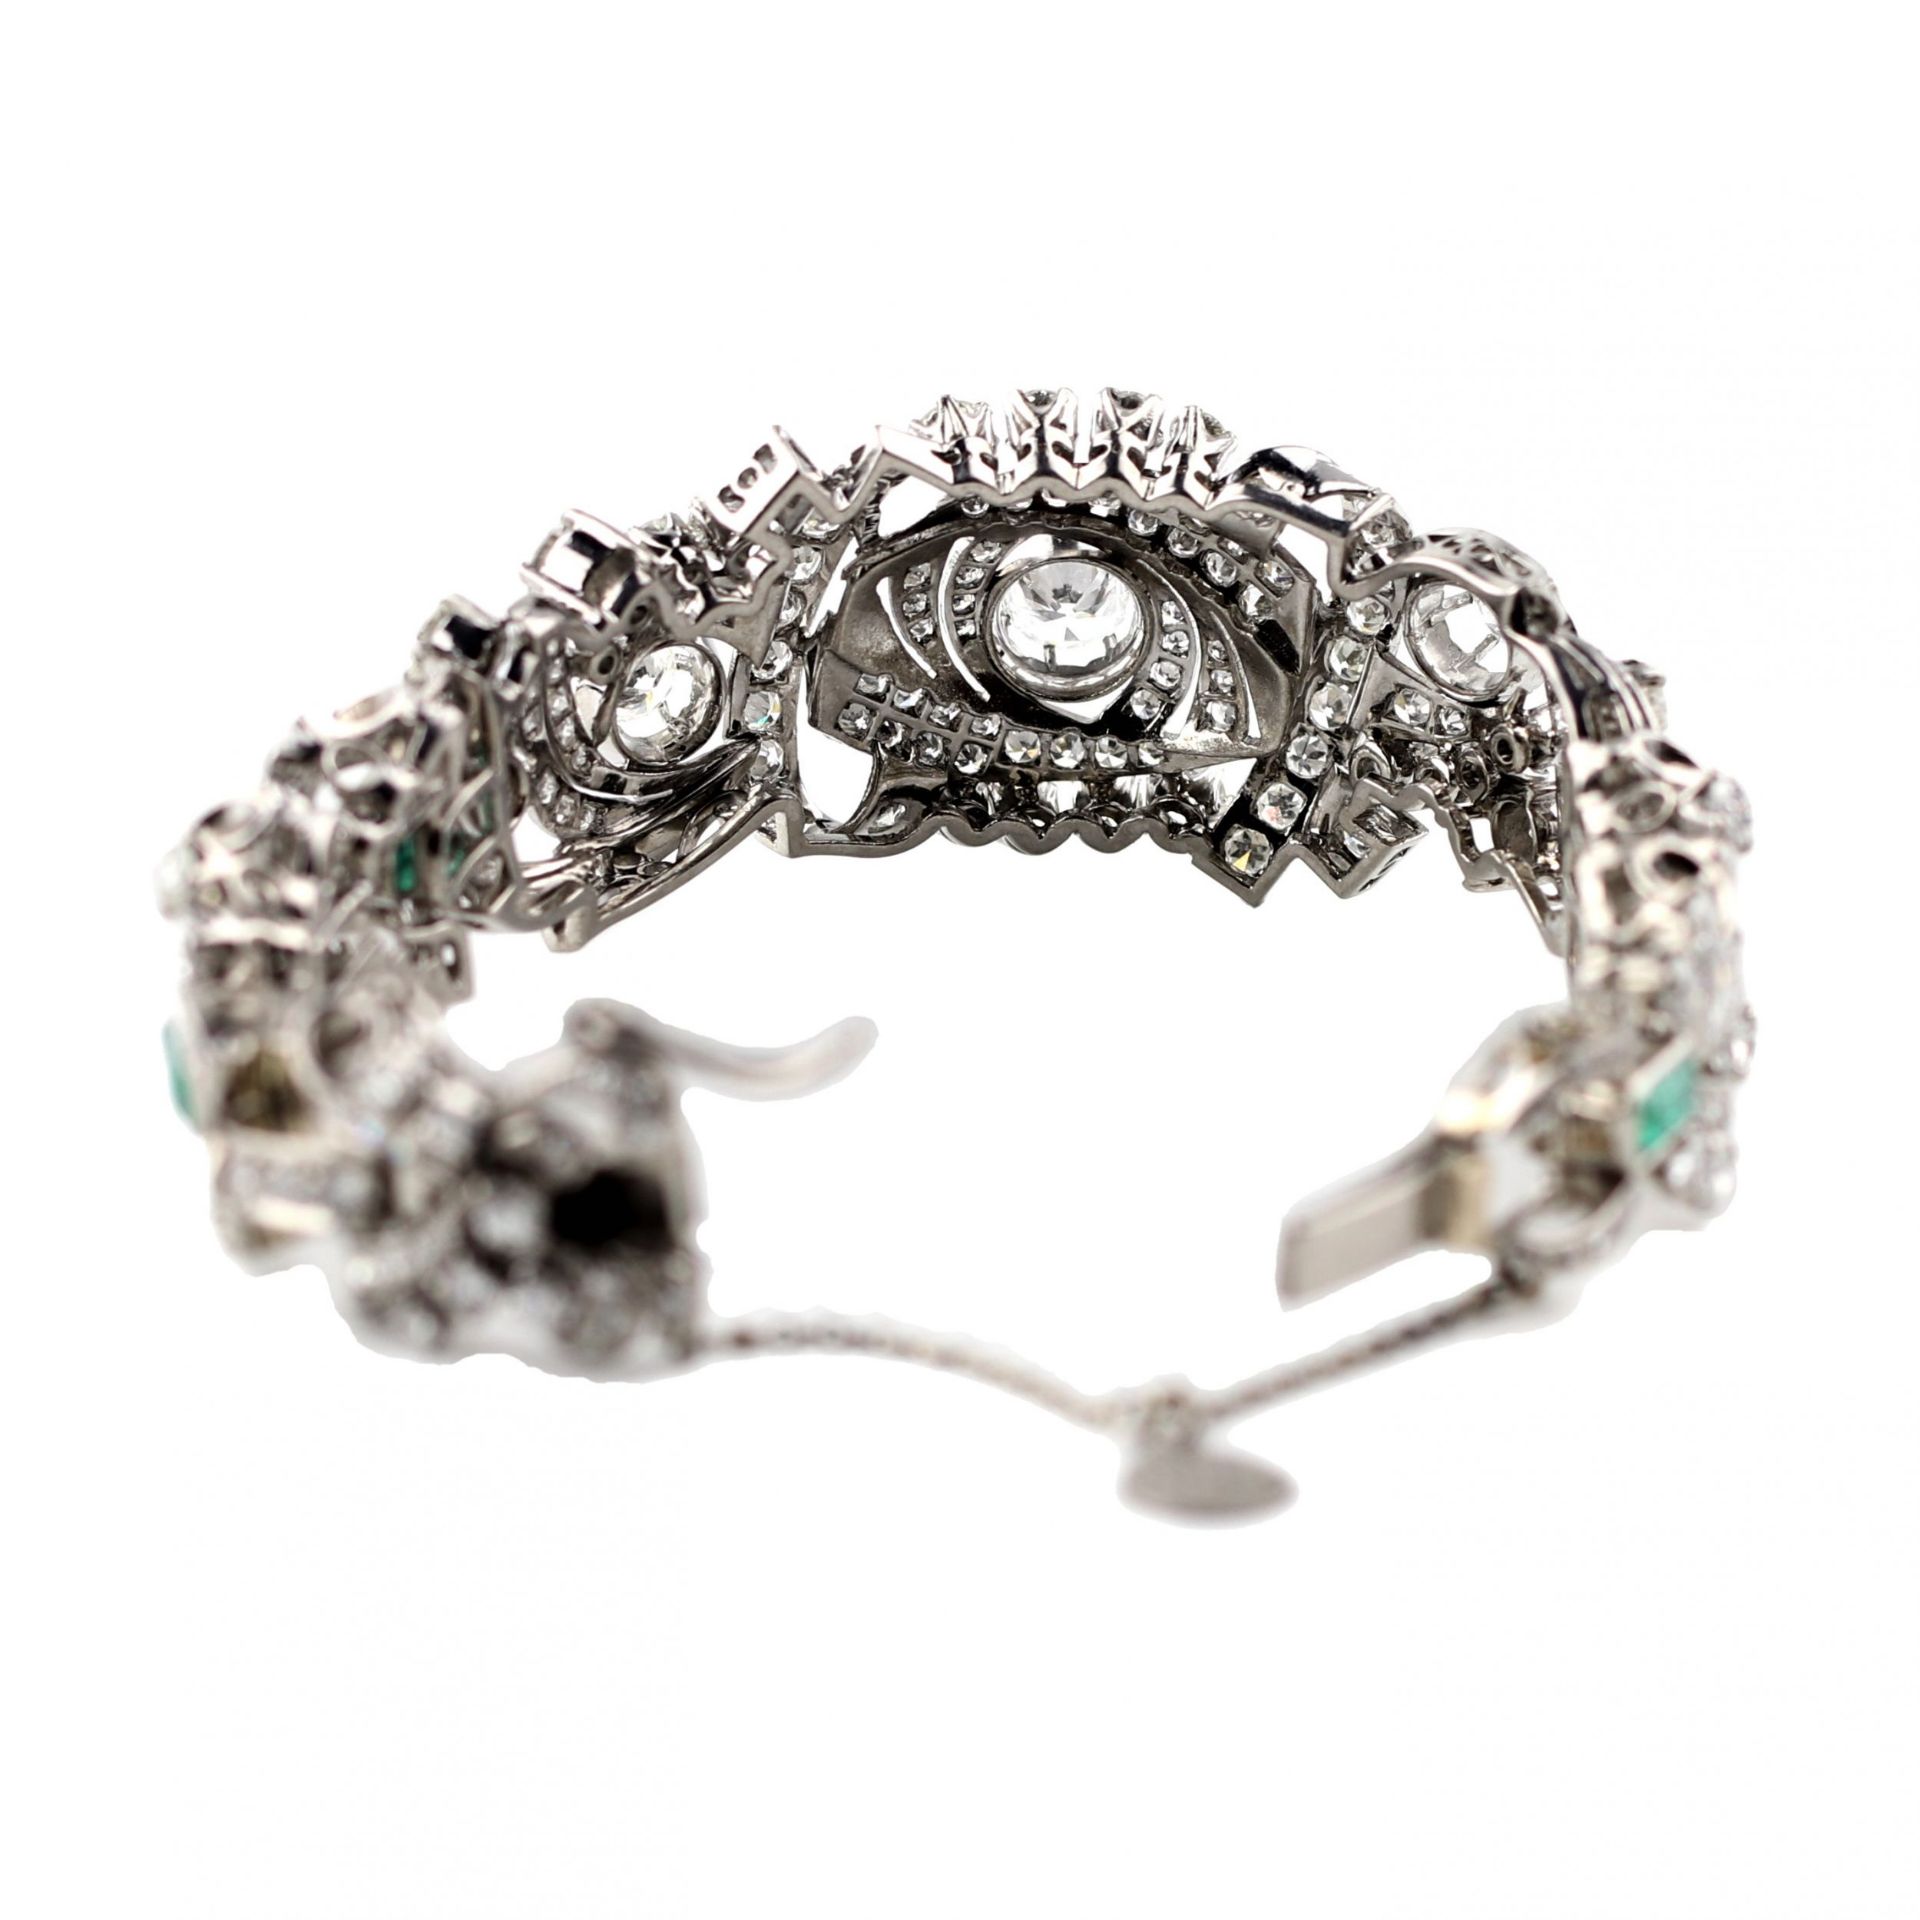 White gold bracelet with diamonds and emeralds - Image 4 of 6